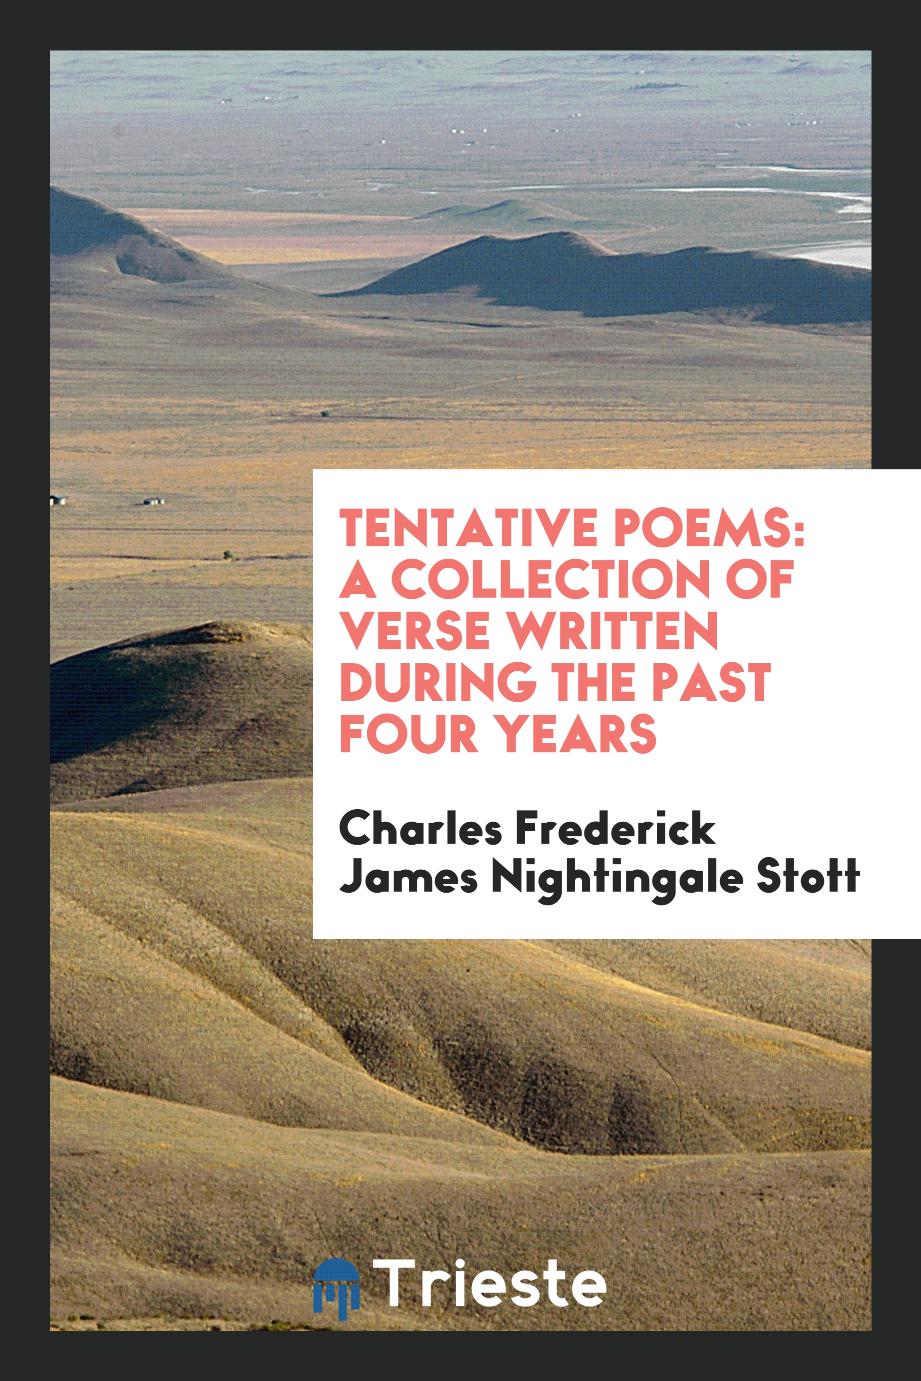 Tentative Poems: A Collection of Verse Written During the Past Four Years